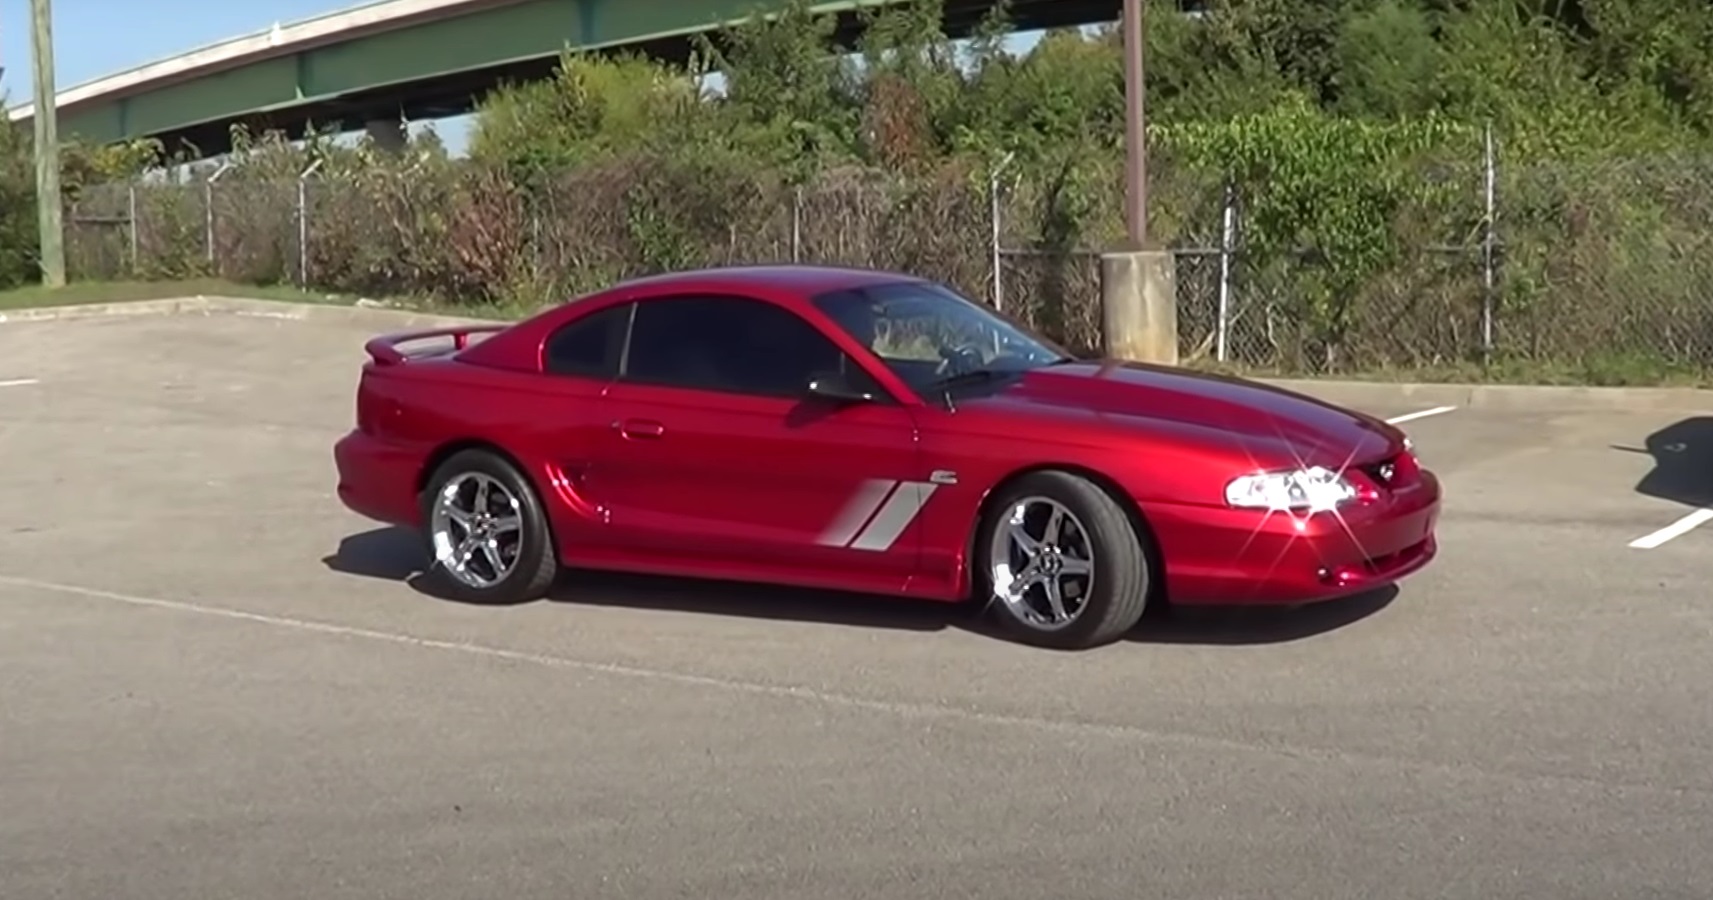 Video: 1995 Ford Mustang GTS In-Depth Tour